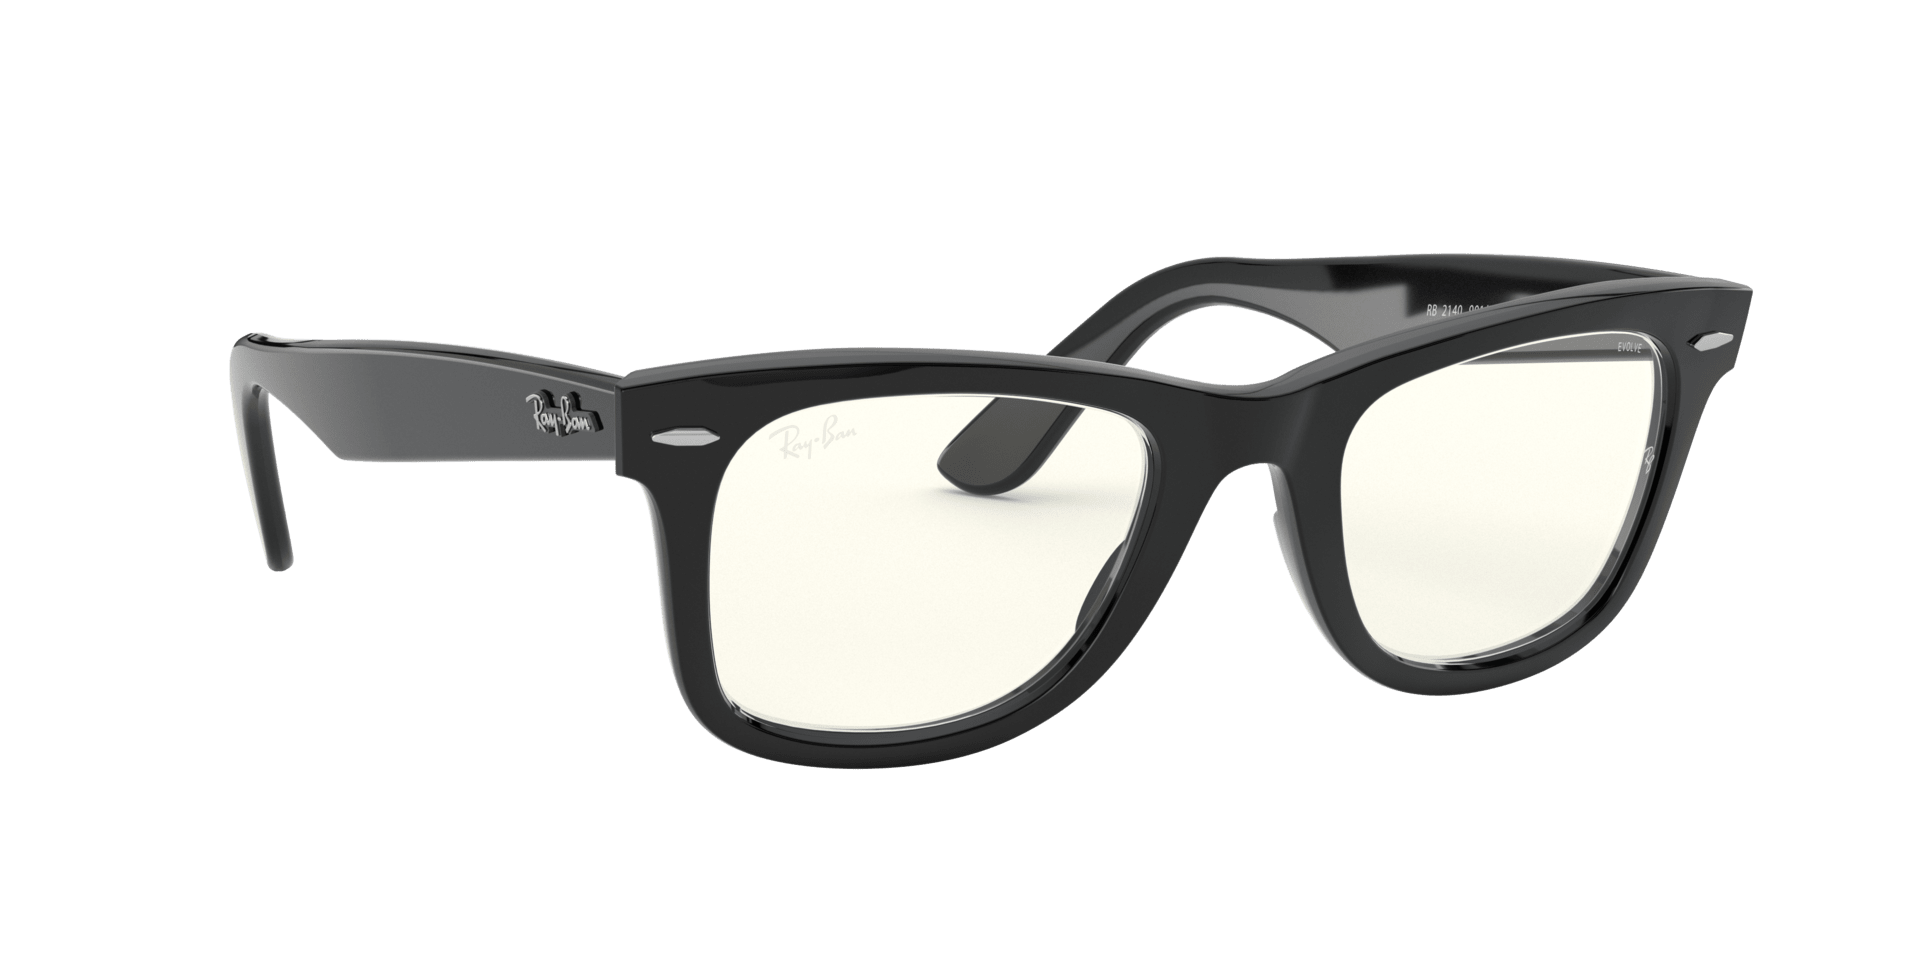 Ray-Ban Everglasses accentuate your 